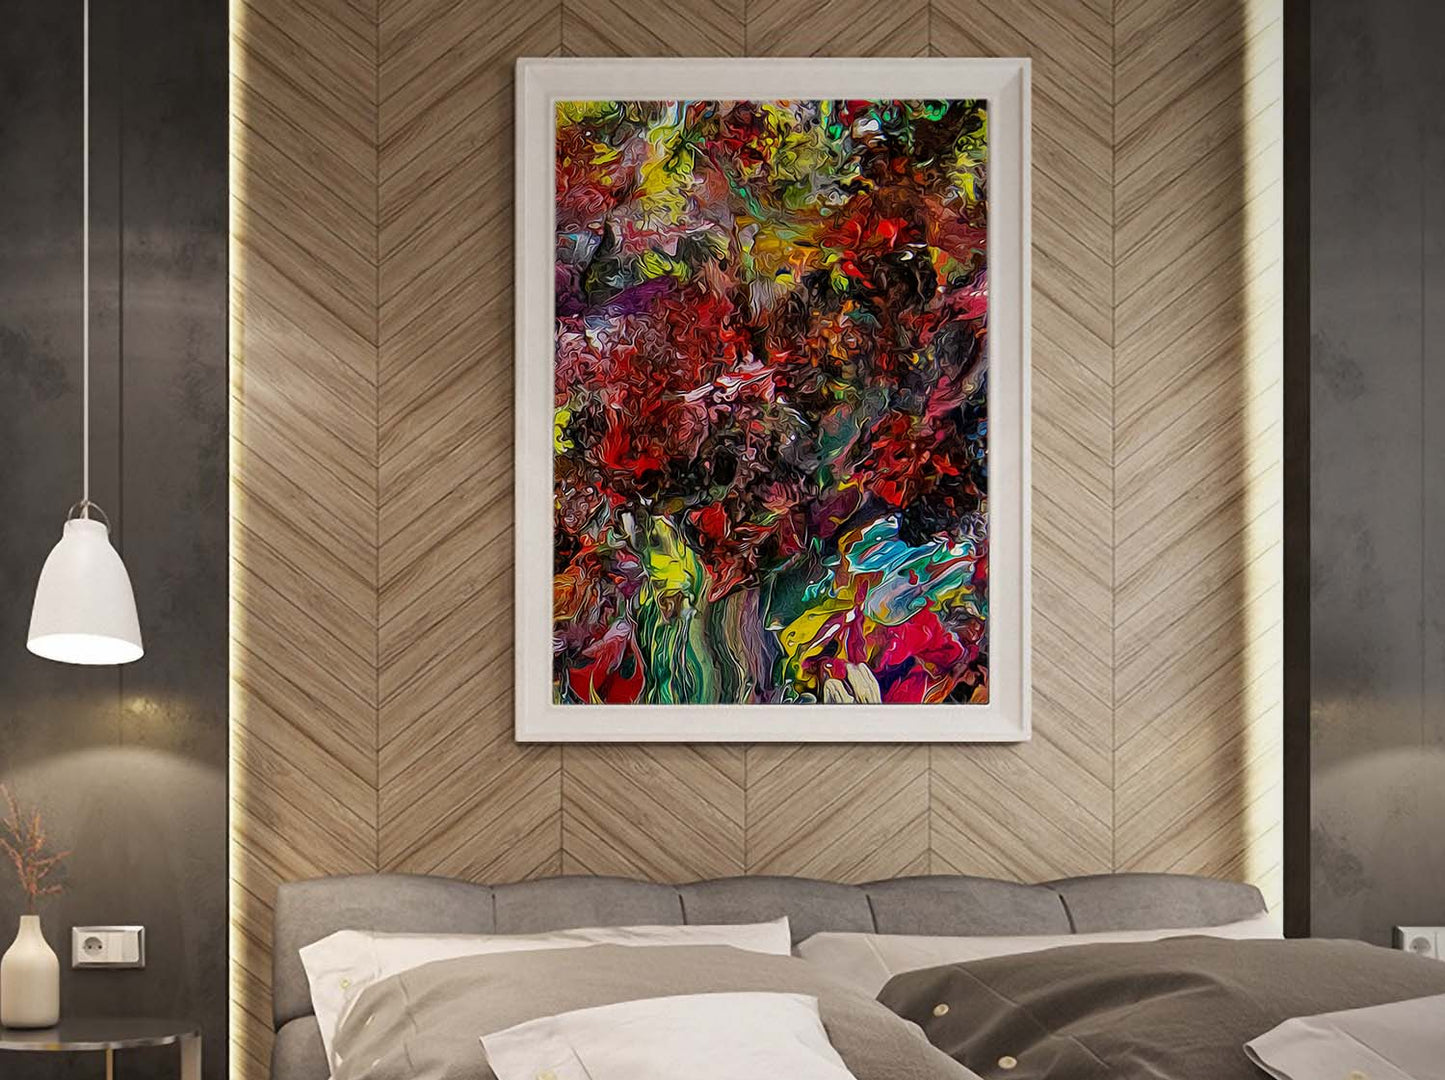 Vid-19 Potpourri framed art print own a wood paneled wall in a bedroom